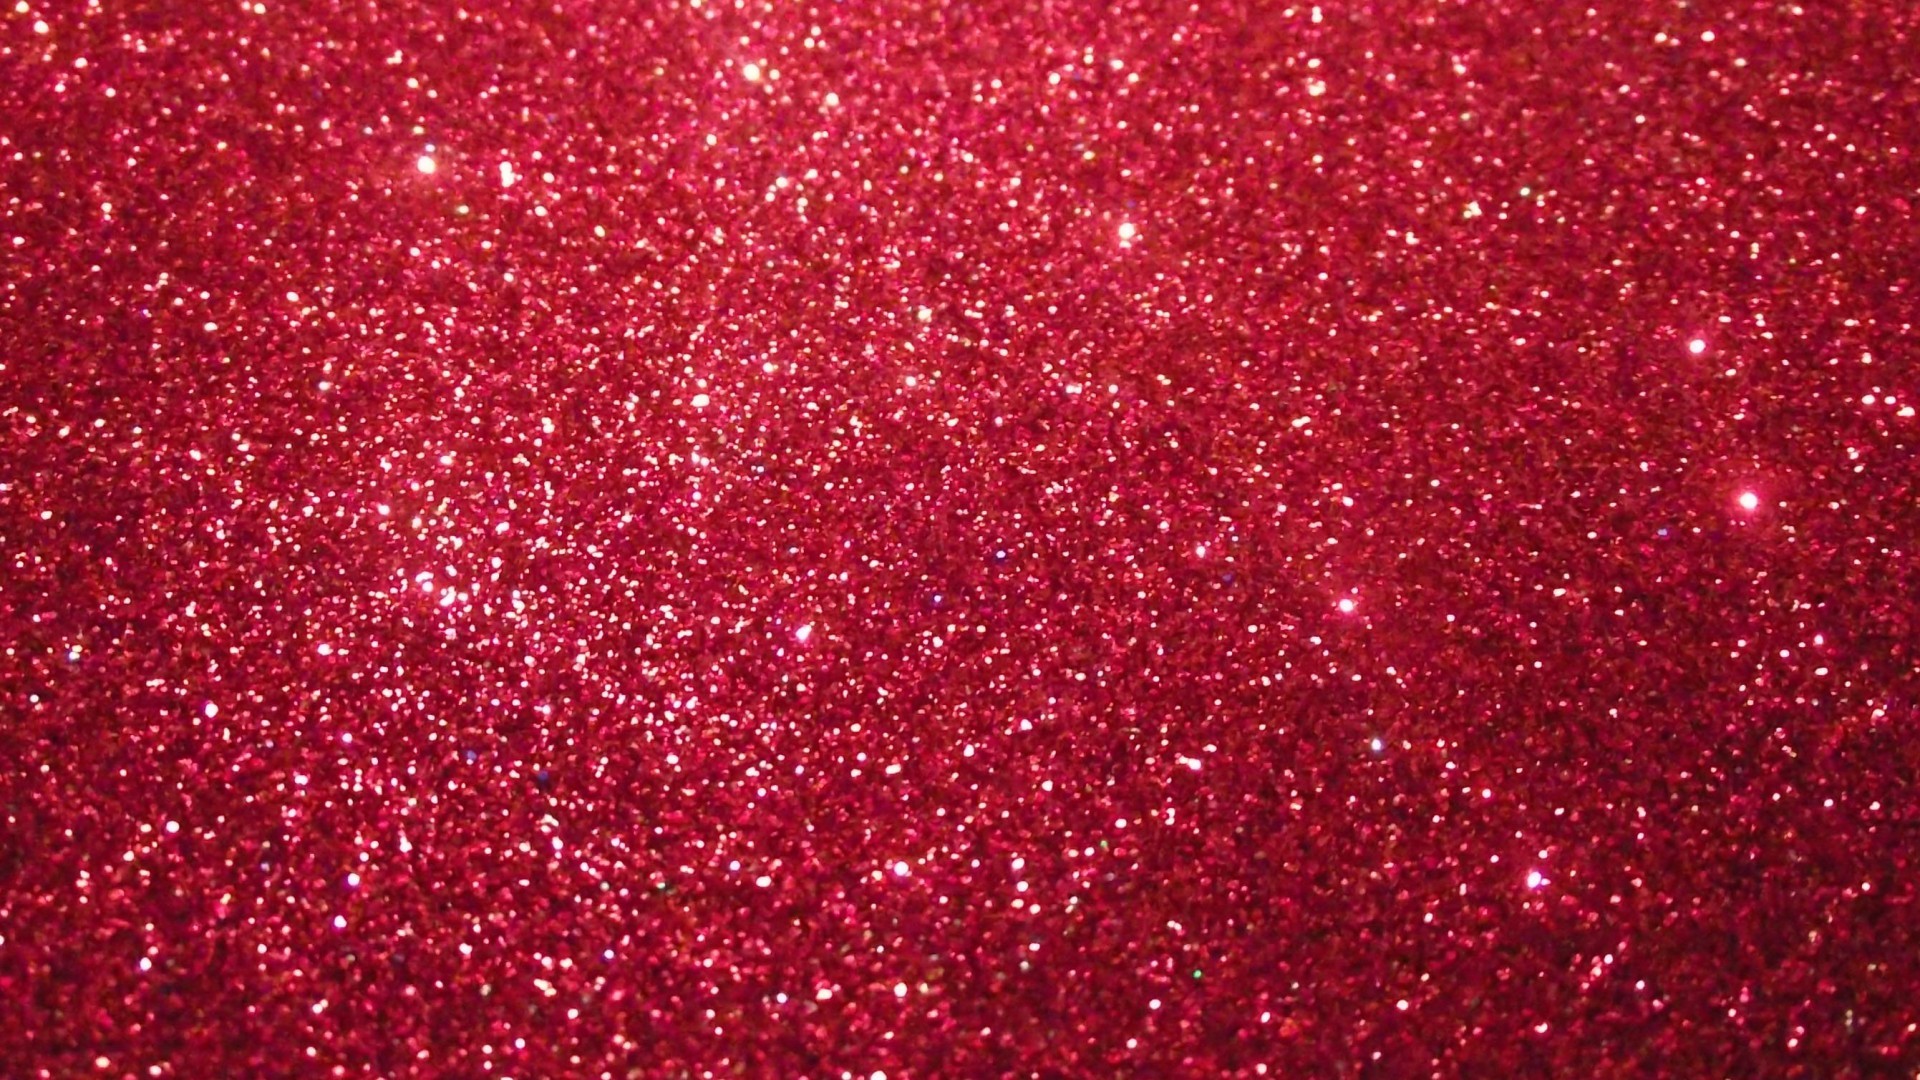 1920x1080 wallpaper.wiki-Images-Pink-Glitter-Backgrounds-PIC-WPE001884